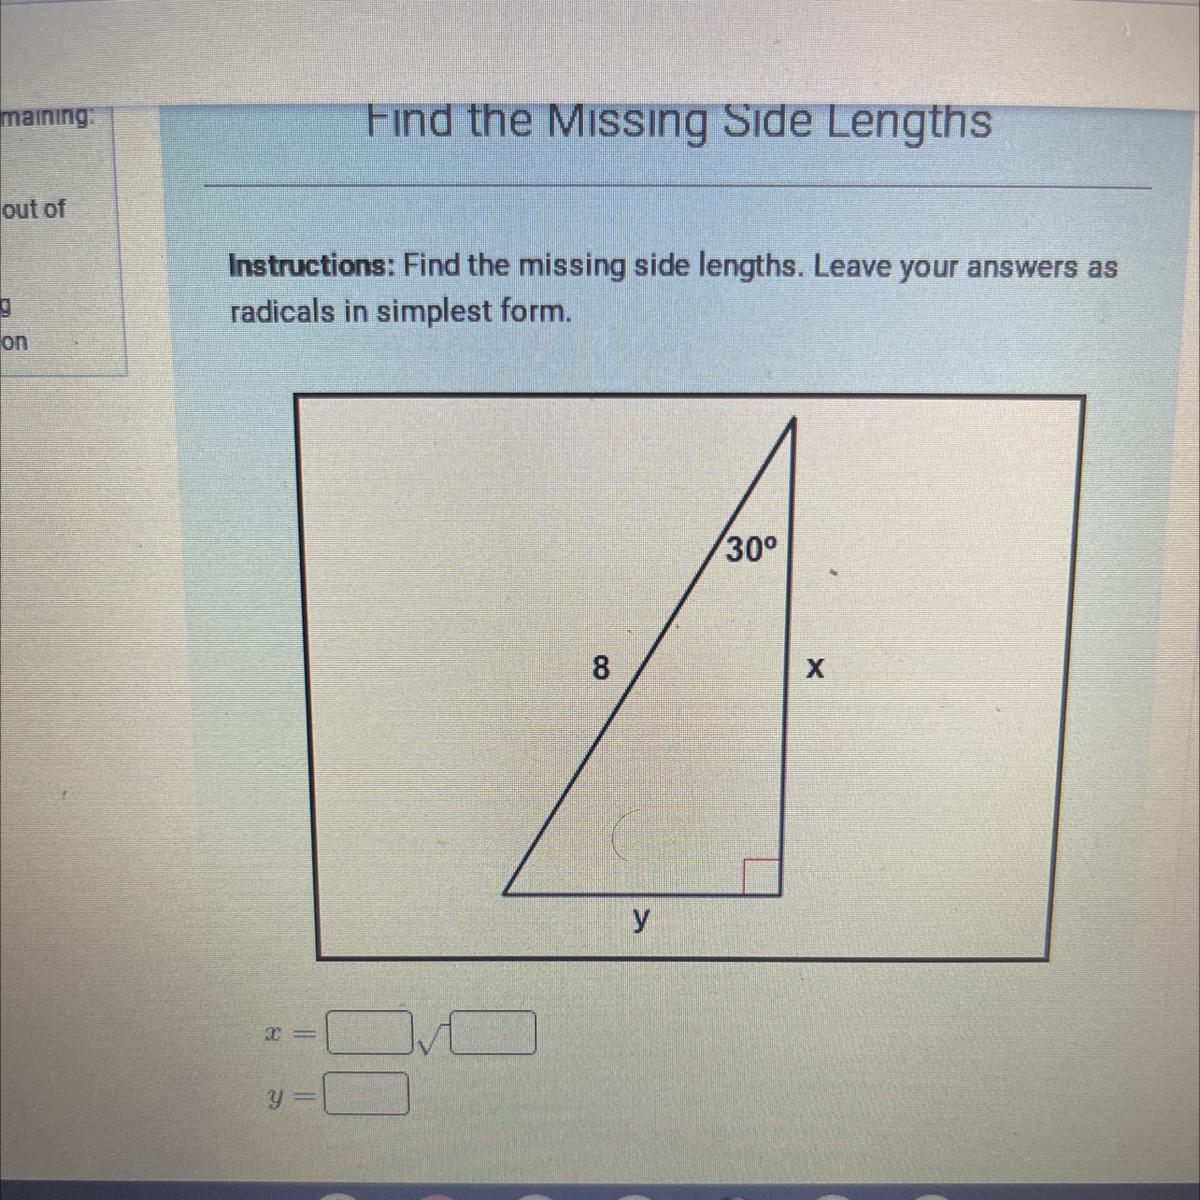 Instructions: Find The Missing Side Lengths. Leave Your Answersradicals In Simplest Form.Please Help,